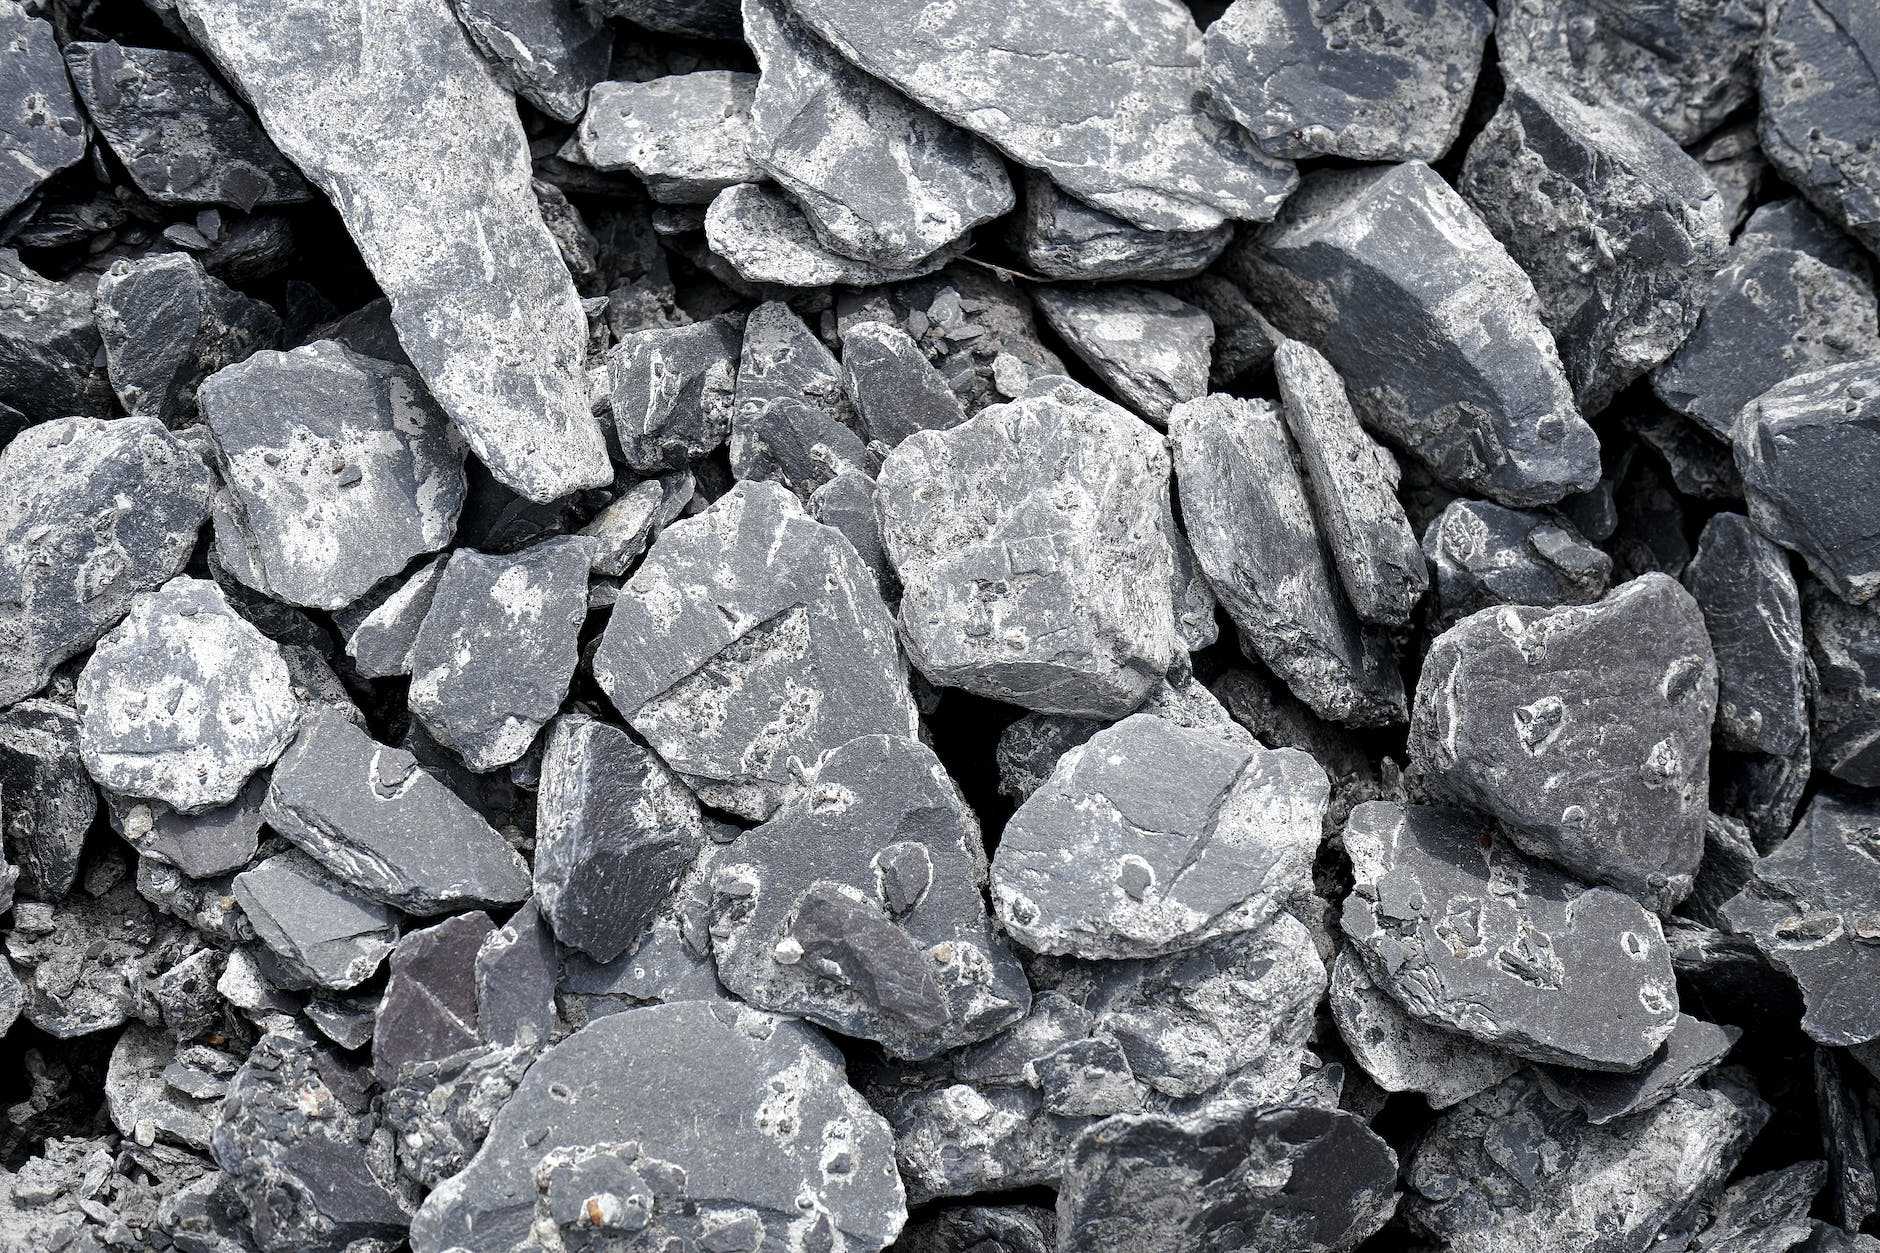 India to auction 20 critical mineral blocks, including lithium and graphite, in two weeks, says government official.